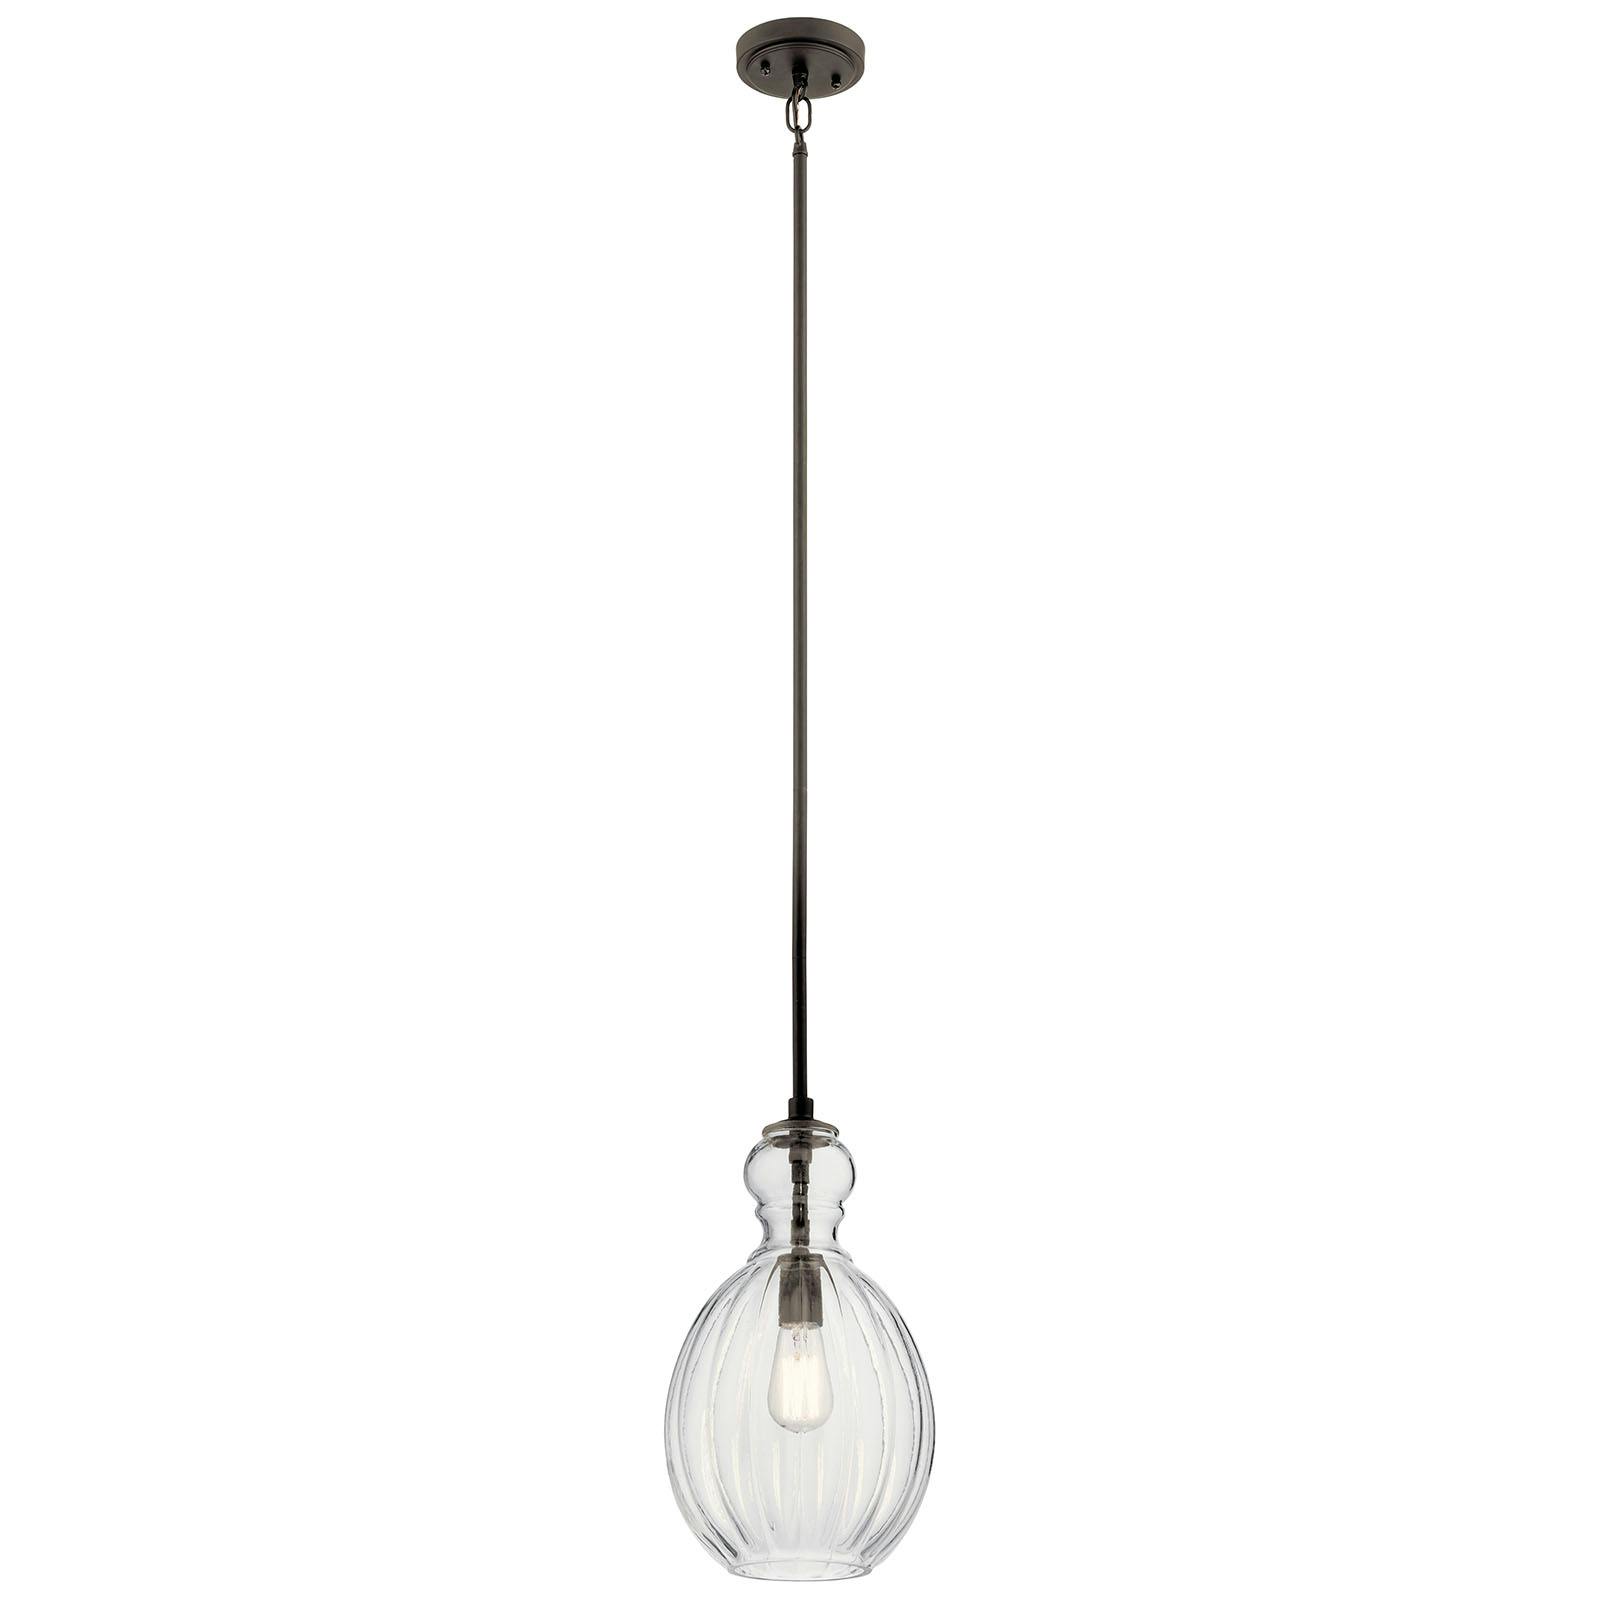 Riviera 16" Pendant in Olde Bronze on a white background